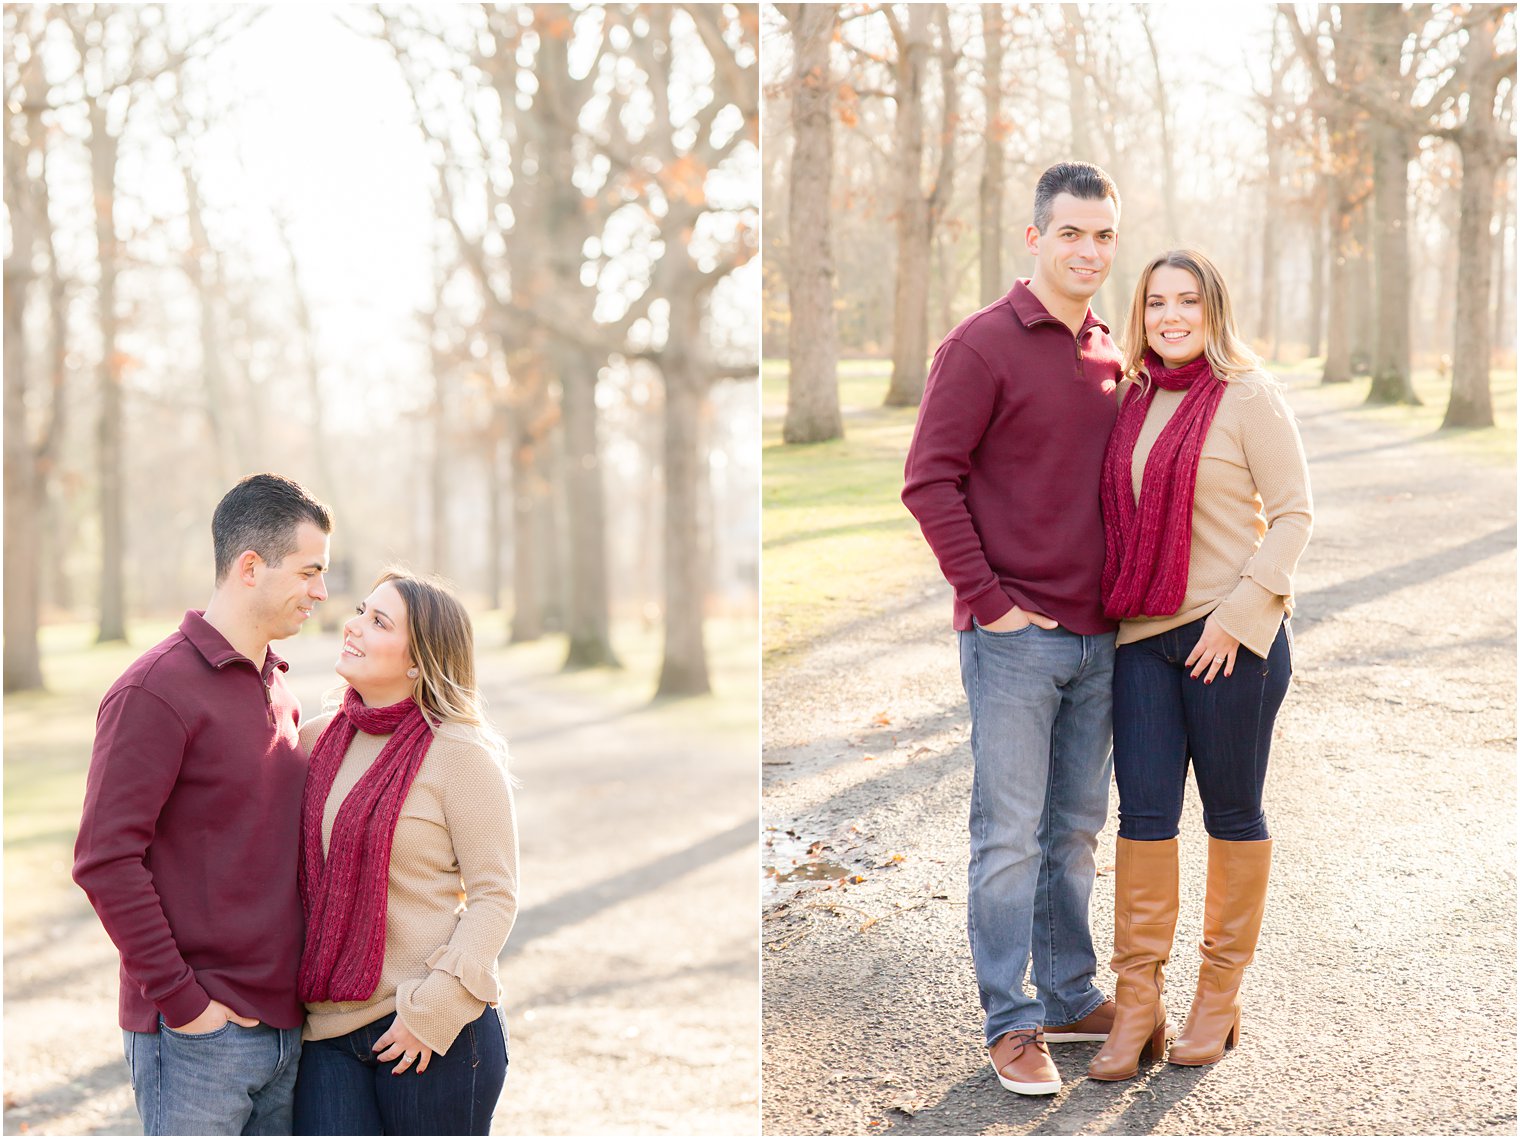 Morning engagement session at Allaire State Park